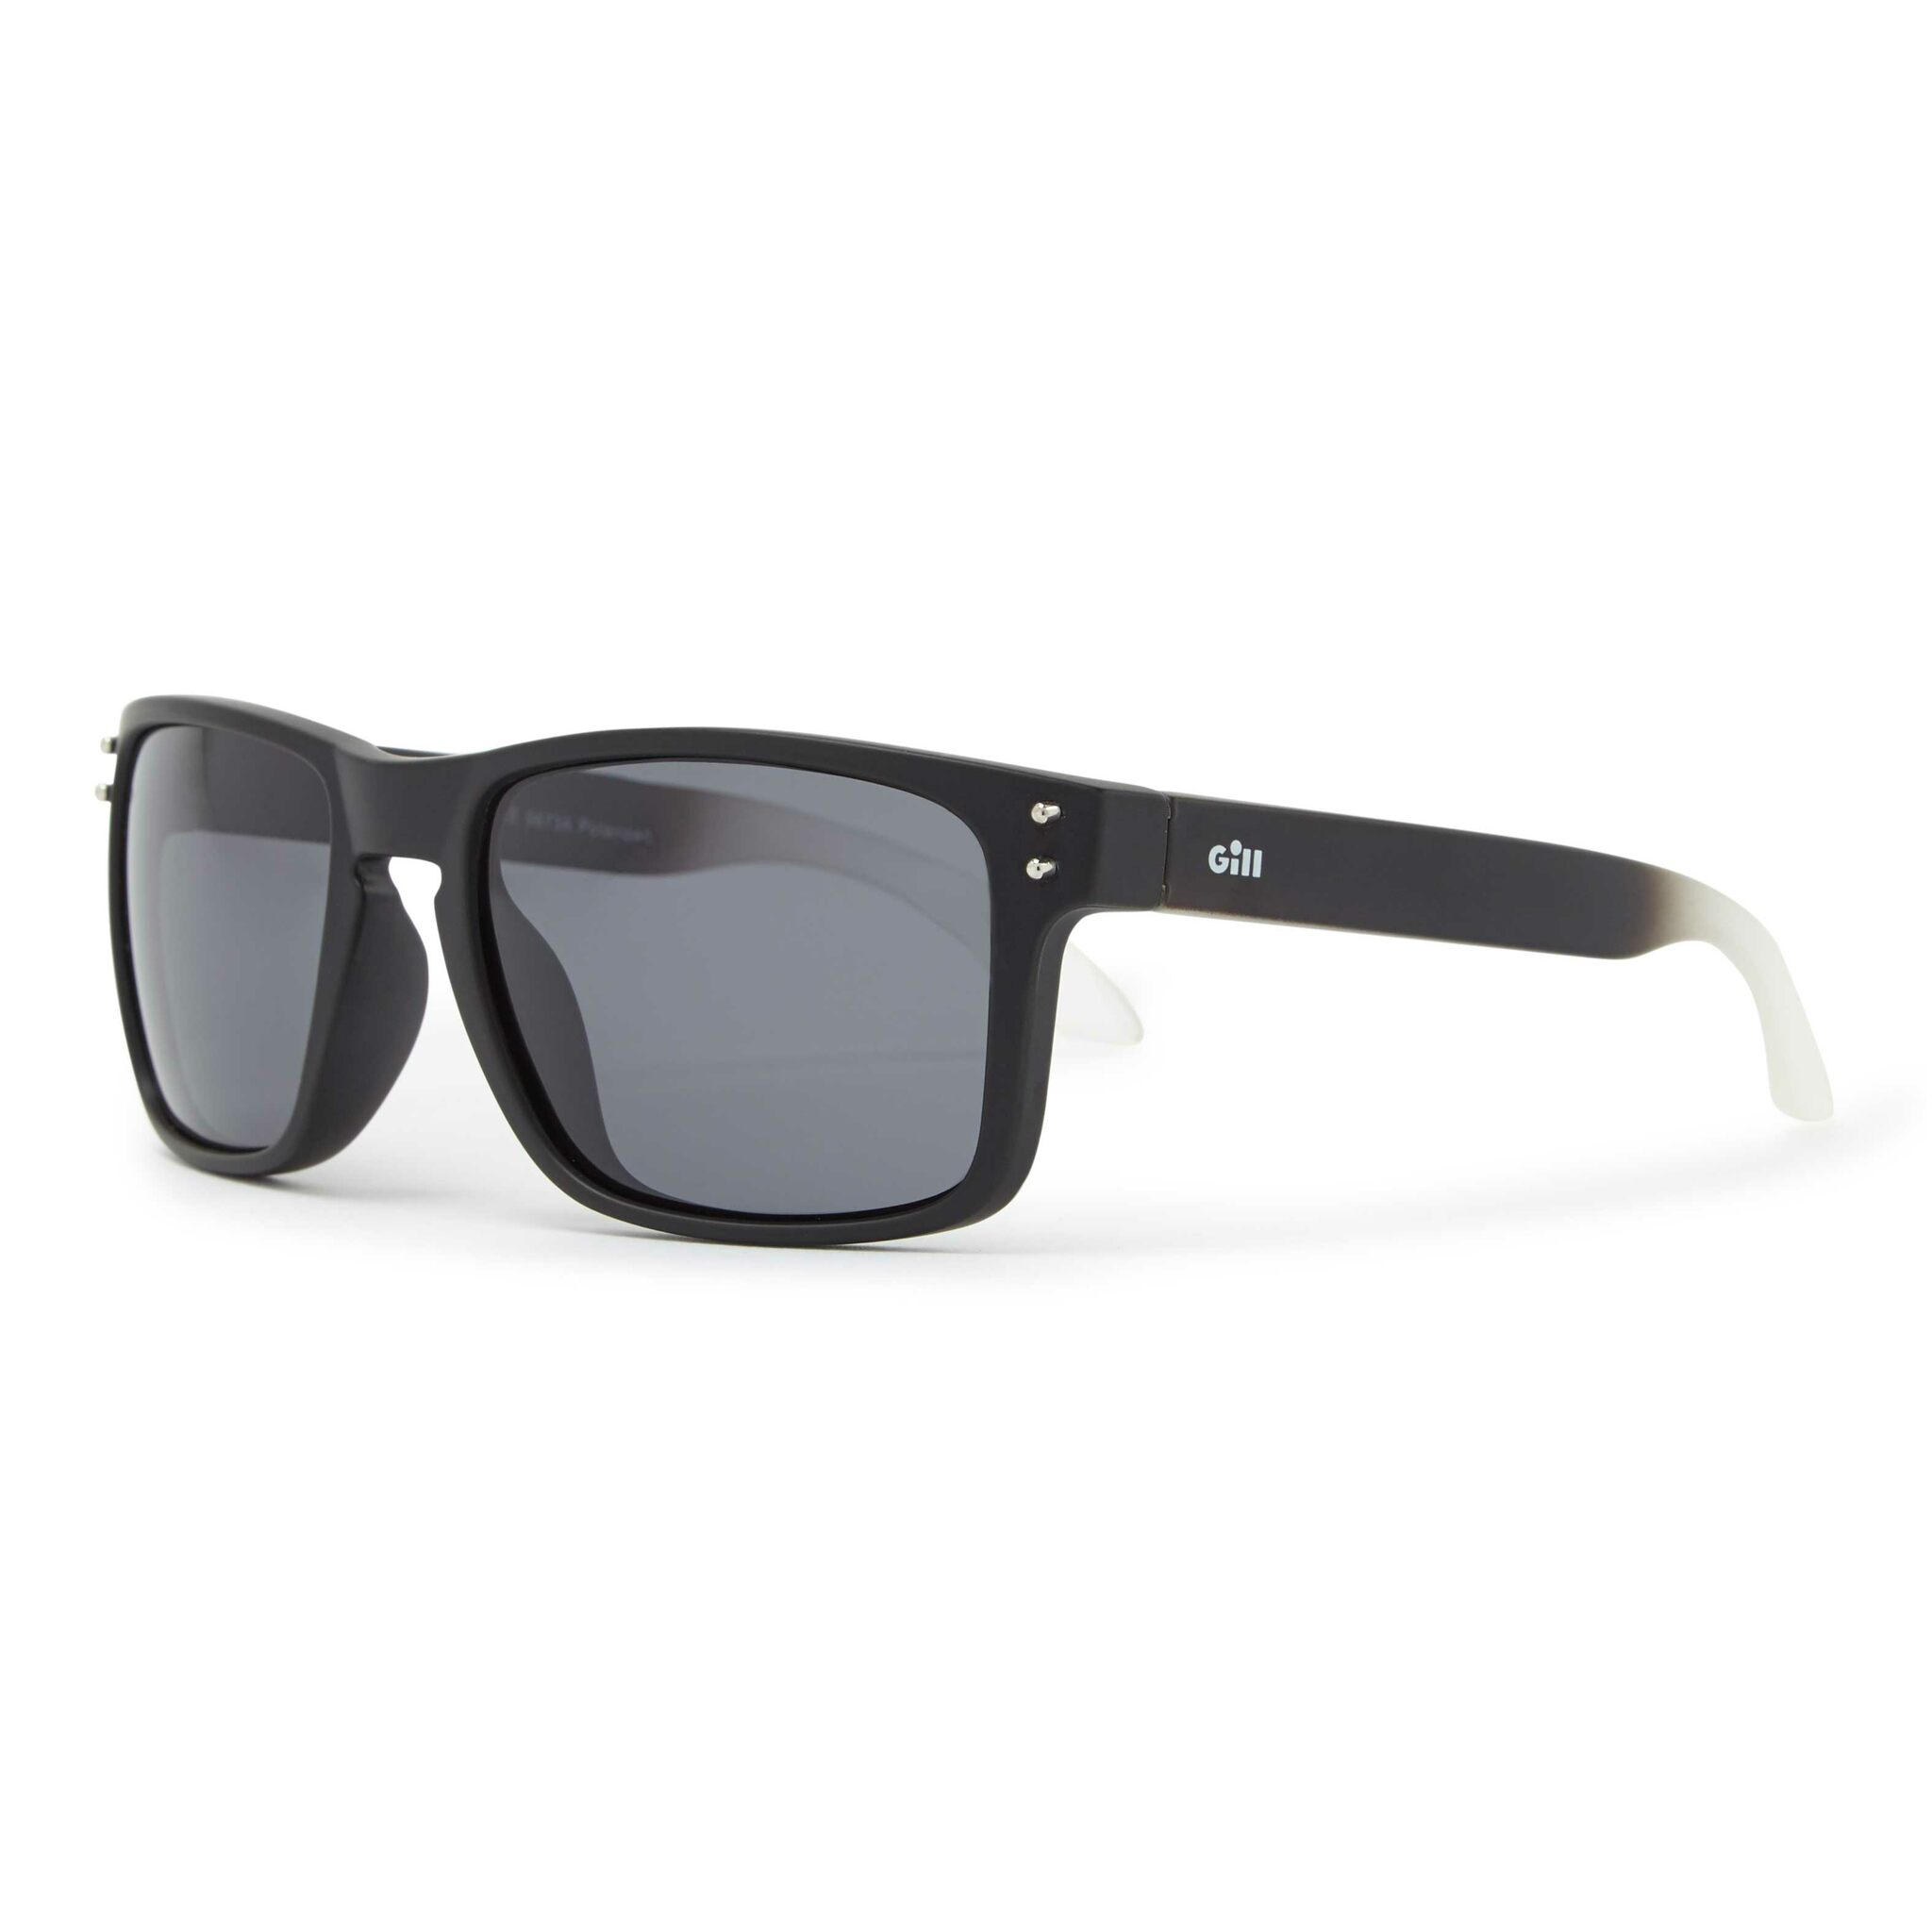 Gill Sonnenbrille ACTIVE KYNANCE